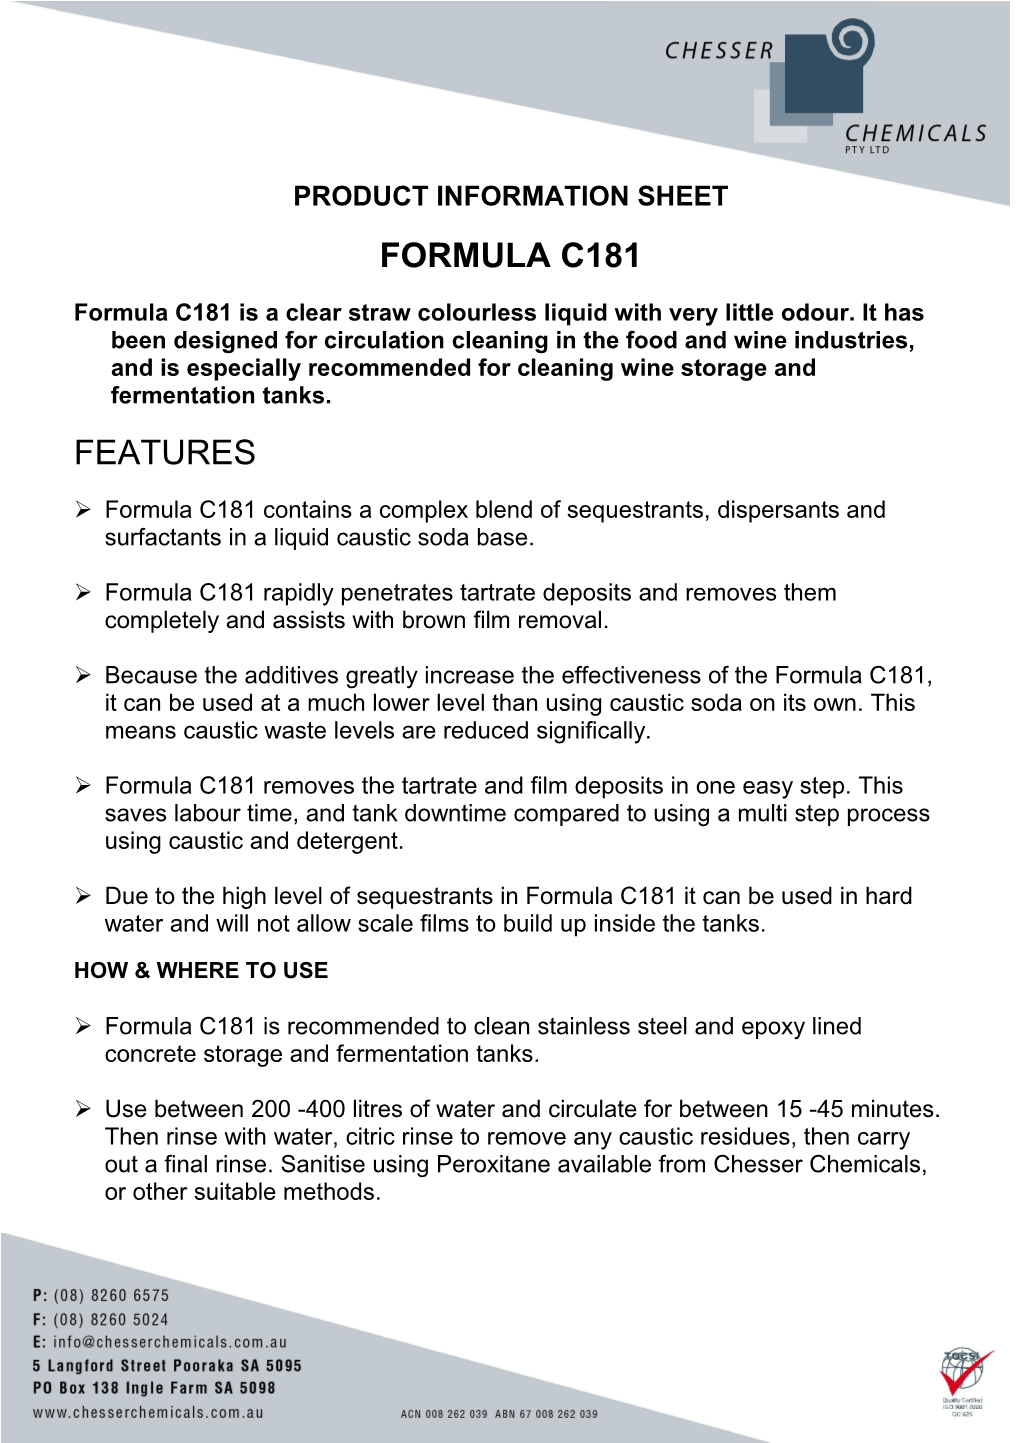 Product Information Sheet s2